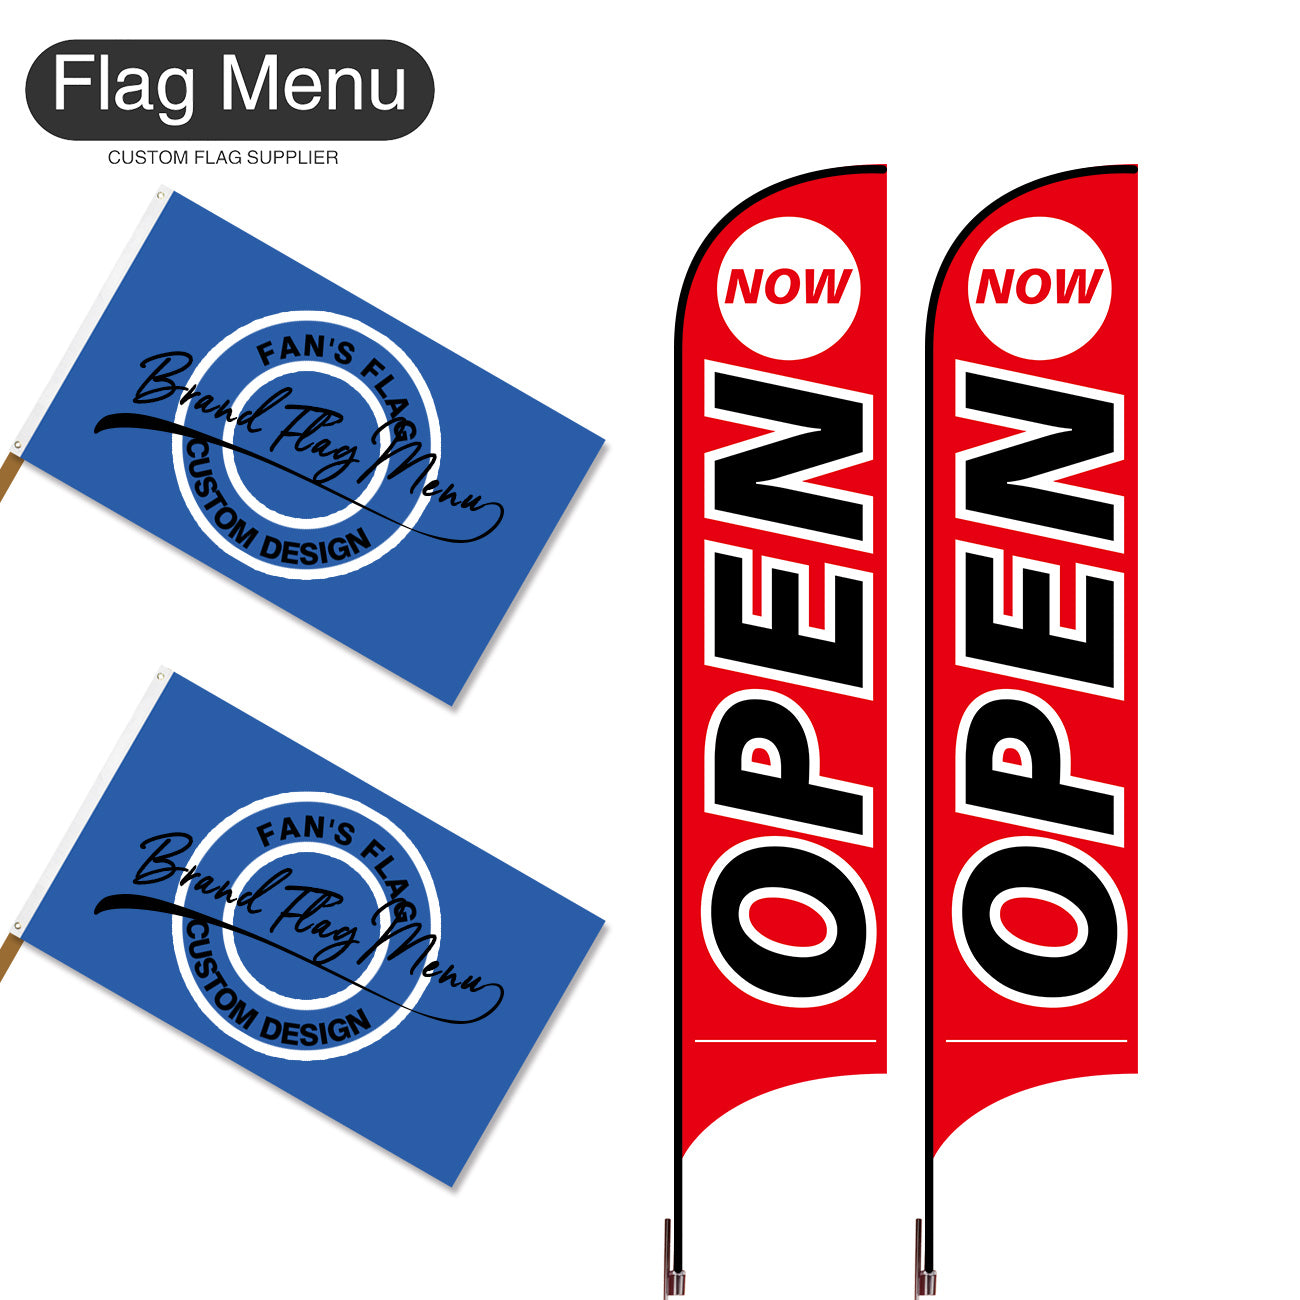 Outdoor Advertising Set - B-Red-S - Feather Flag -Double Sided & 3'x5' Regular Flag -Single Sided-Cross & Water Bag-Flag Menu